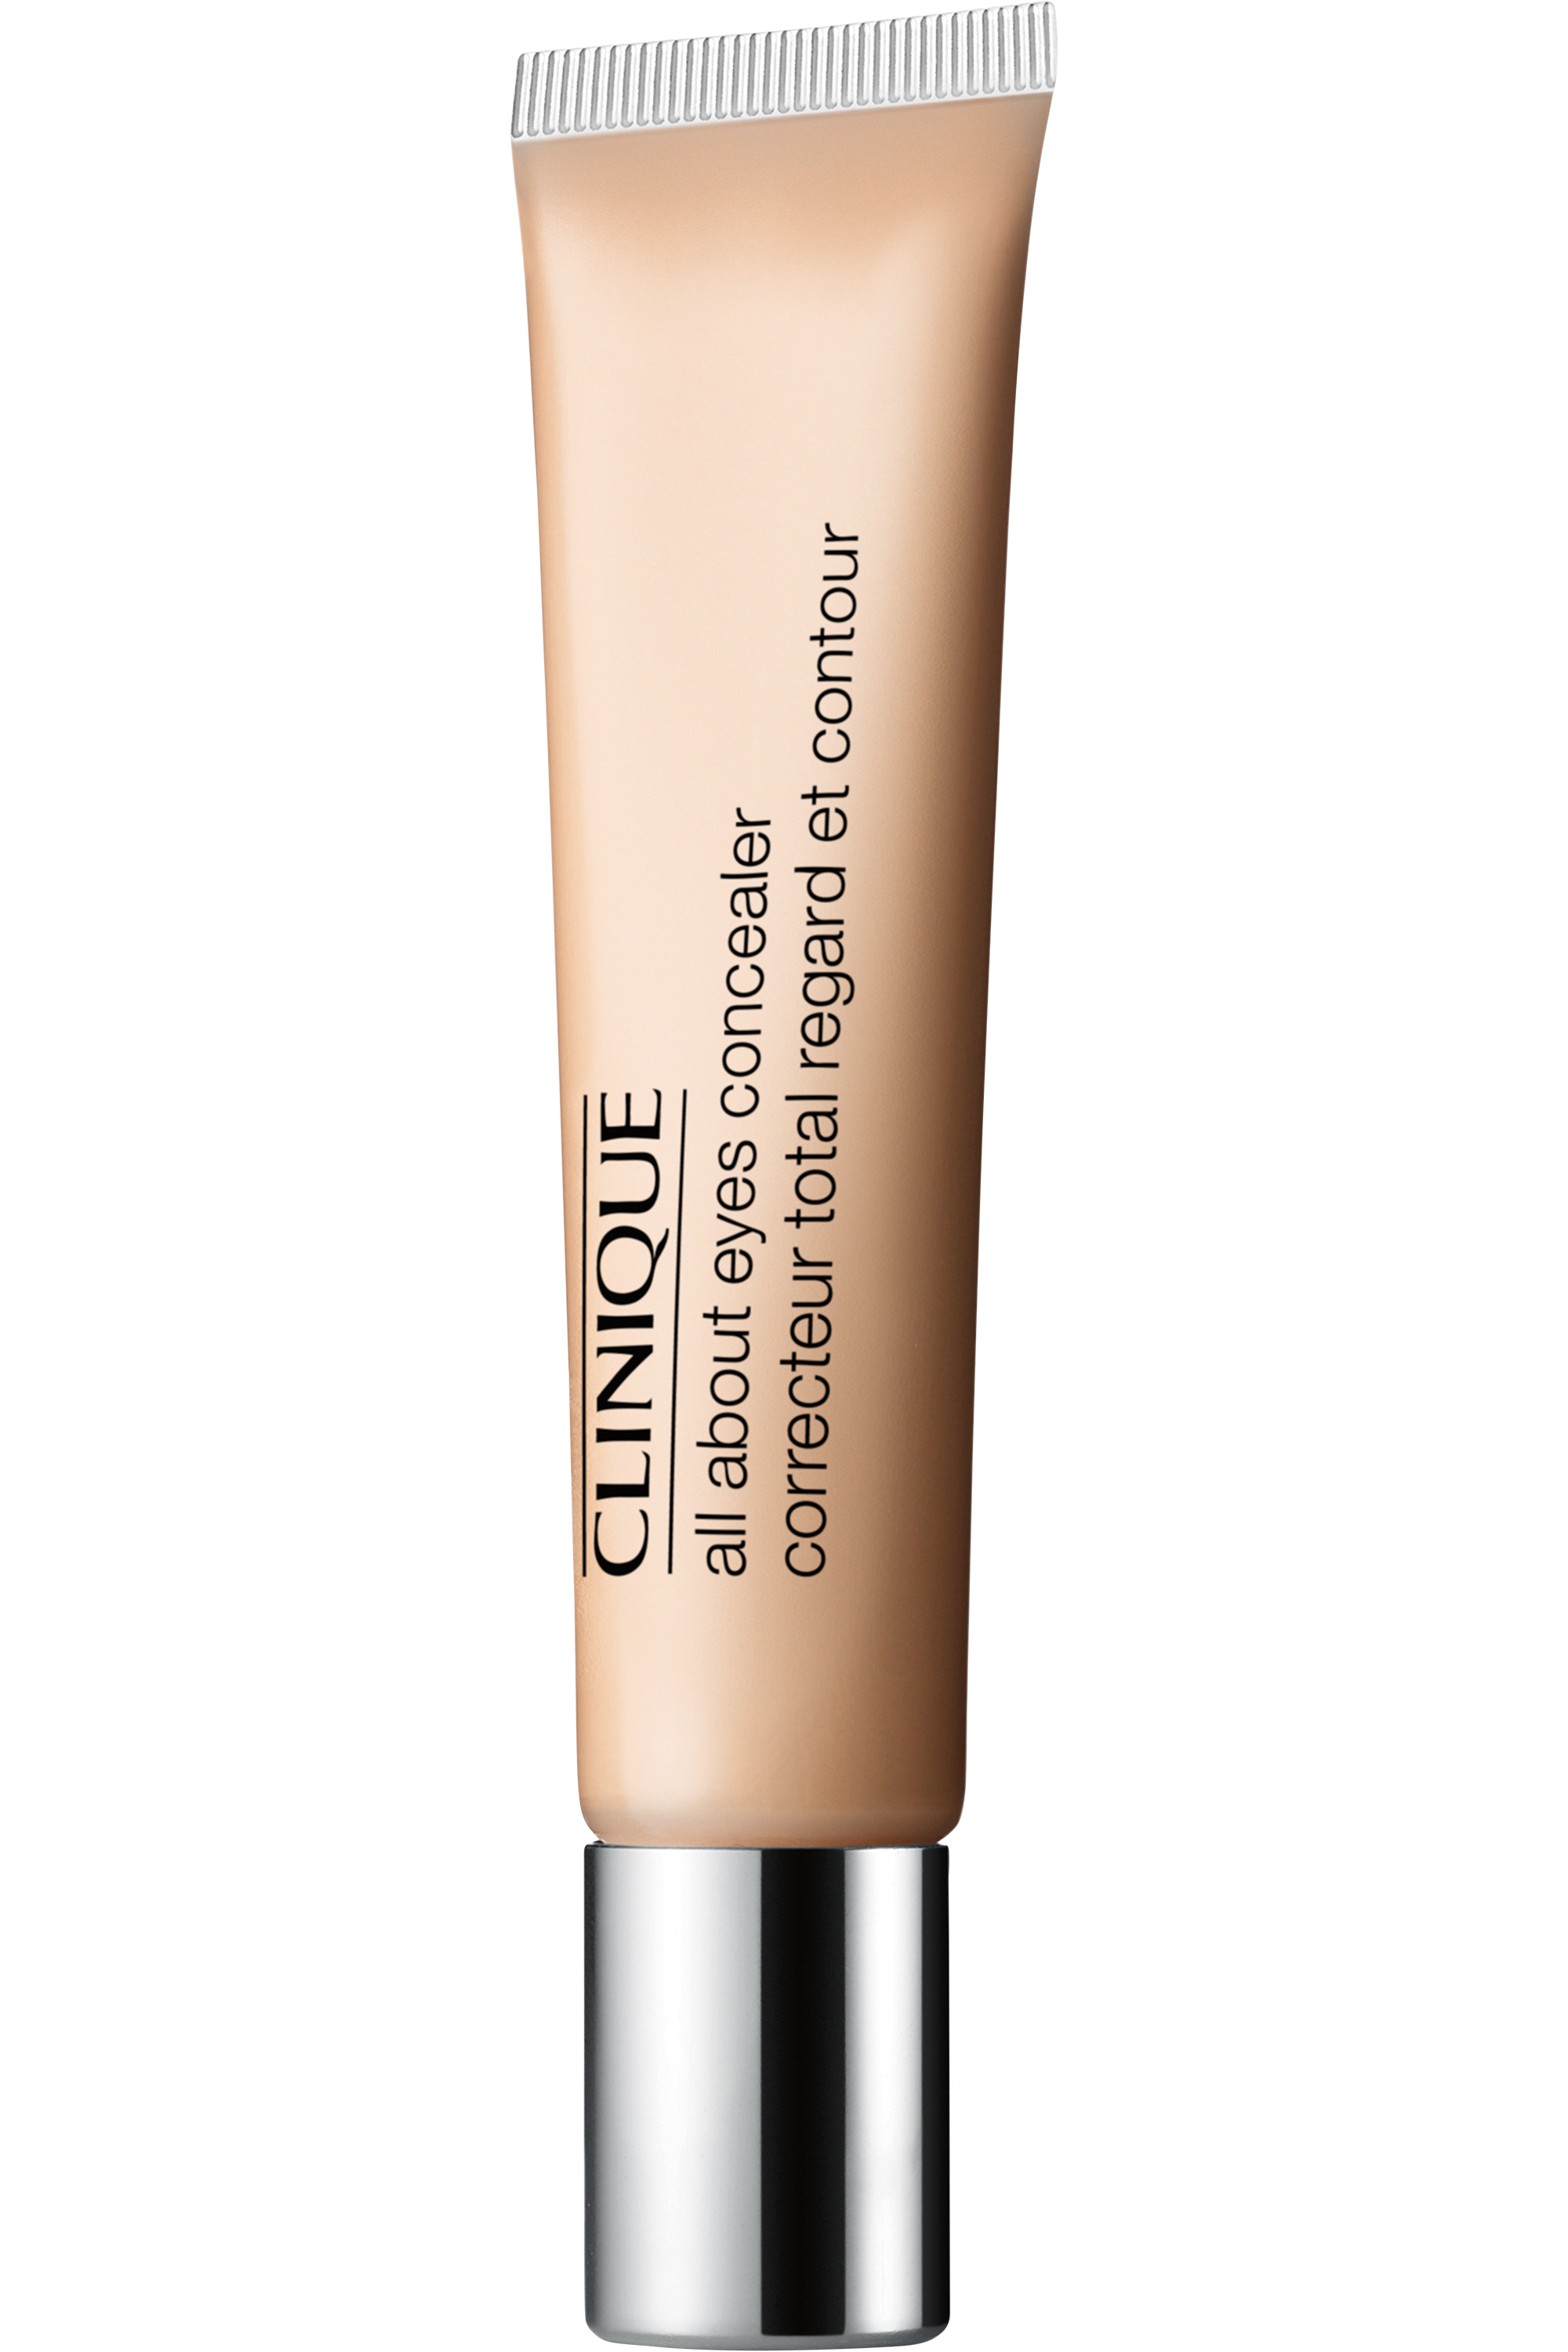 clinique all about eyes concealer